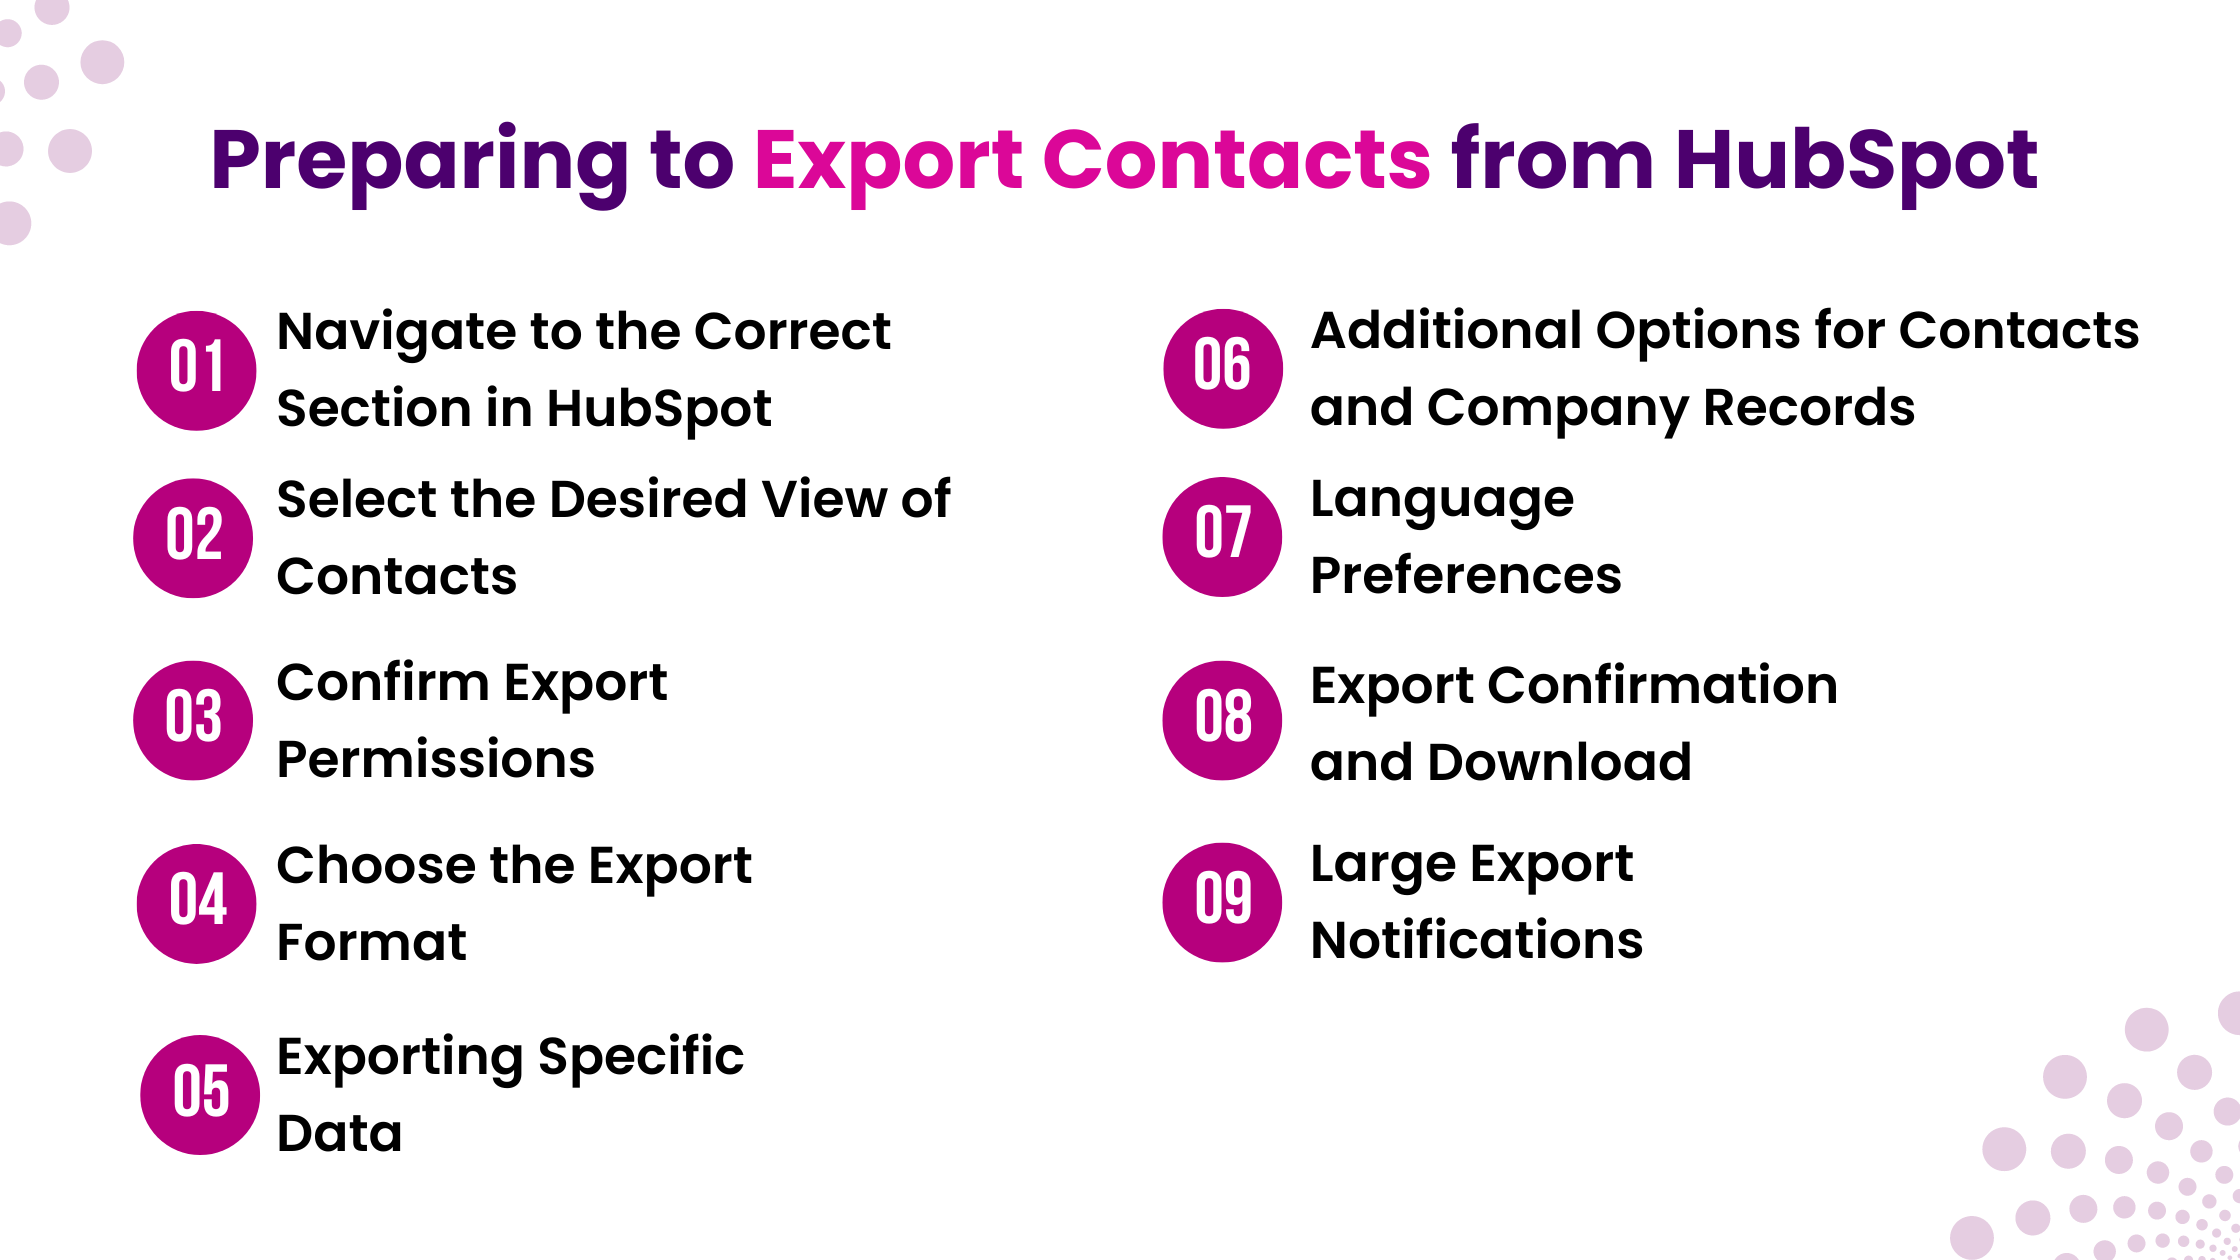 Preparing to Export Contacts from HubSpot